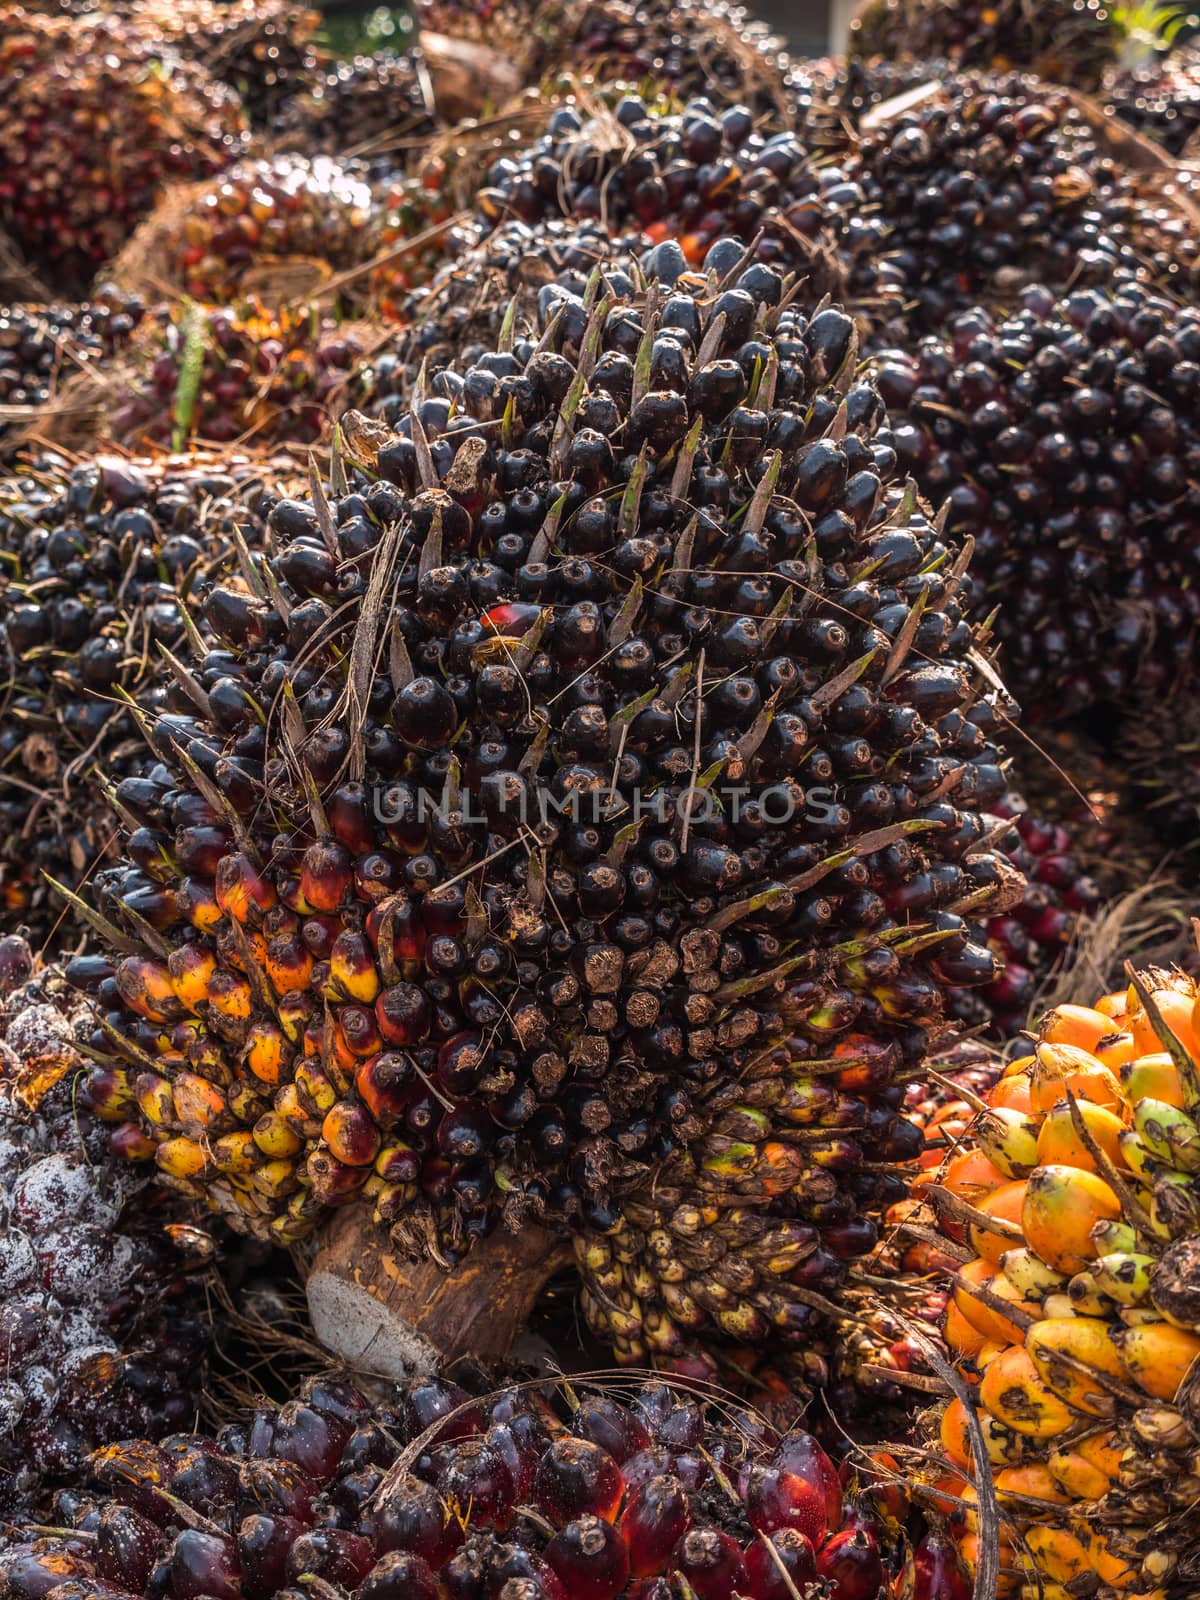 Palm Oil Fruits on the floor at Thailand.